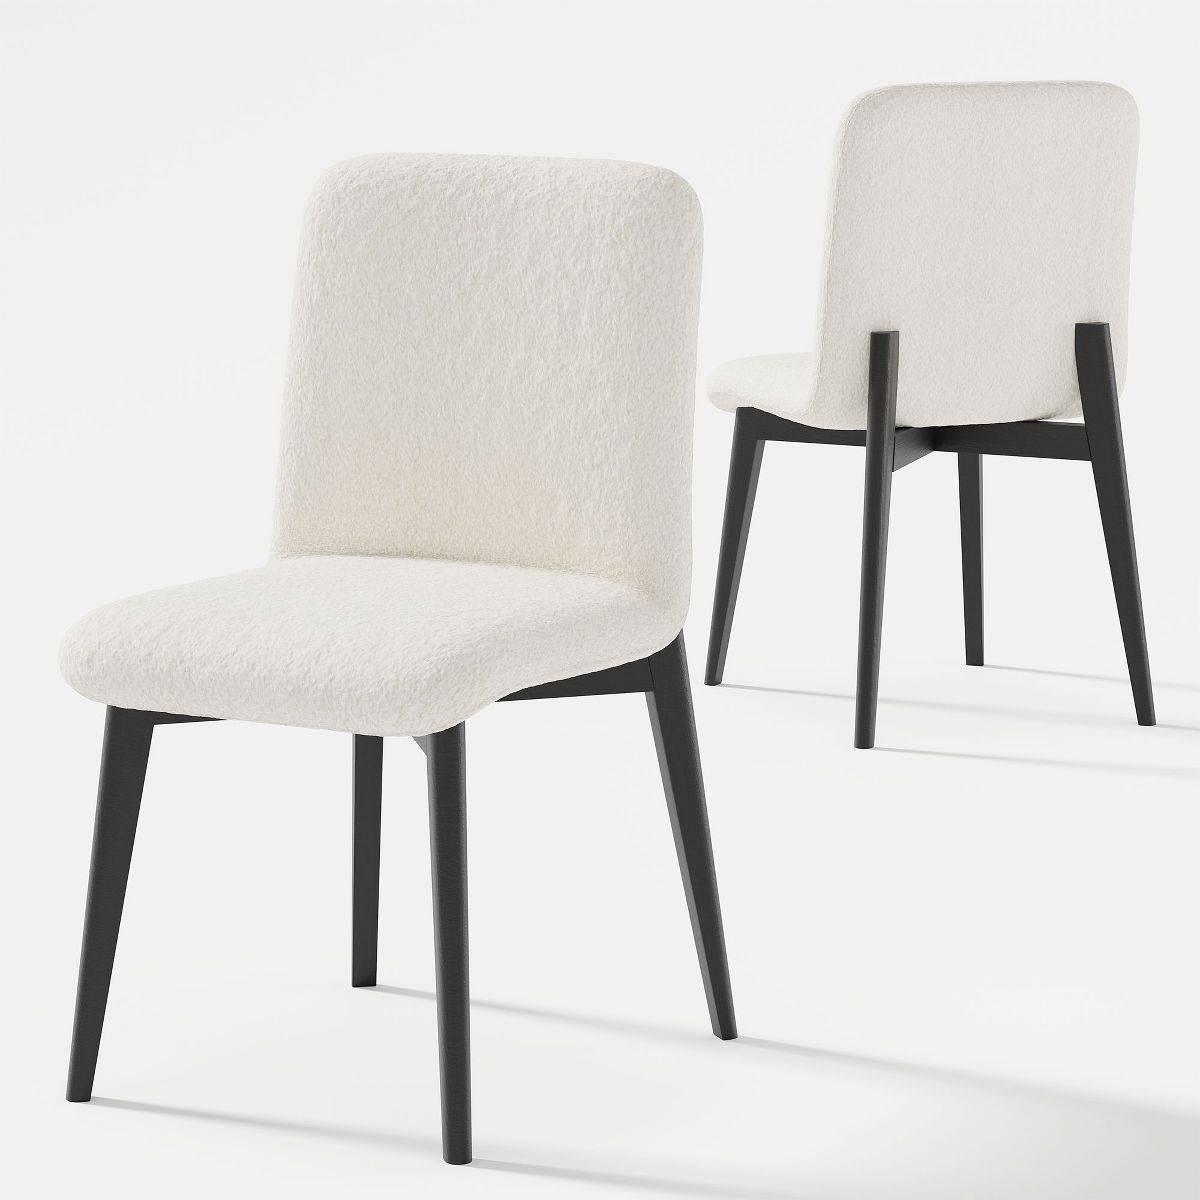 Neutypechic Armless Chairs Dining Chair with Wooden Legs (Set of 2) | Target